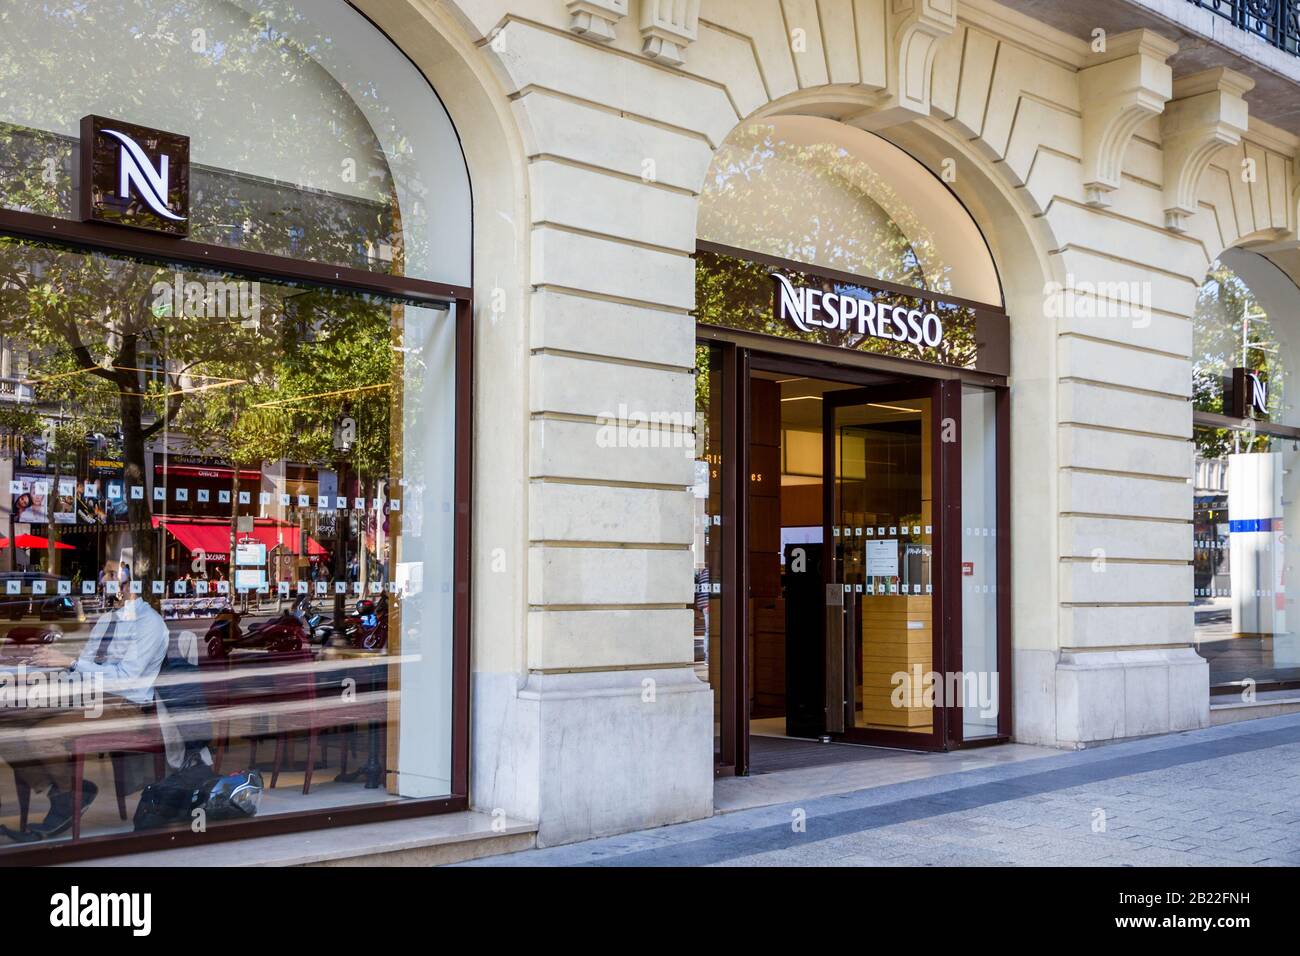 Paris/France - September 10, 2019 : The Nespresso coffee store on  Champs-Elysees avenue Stock Photo - Alamy